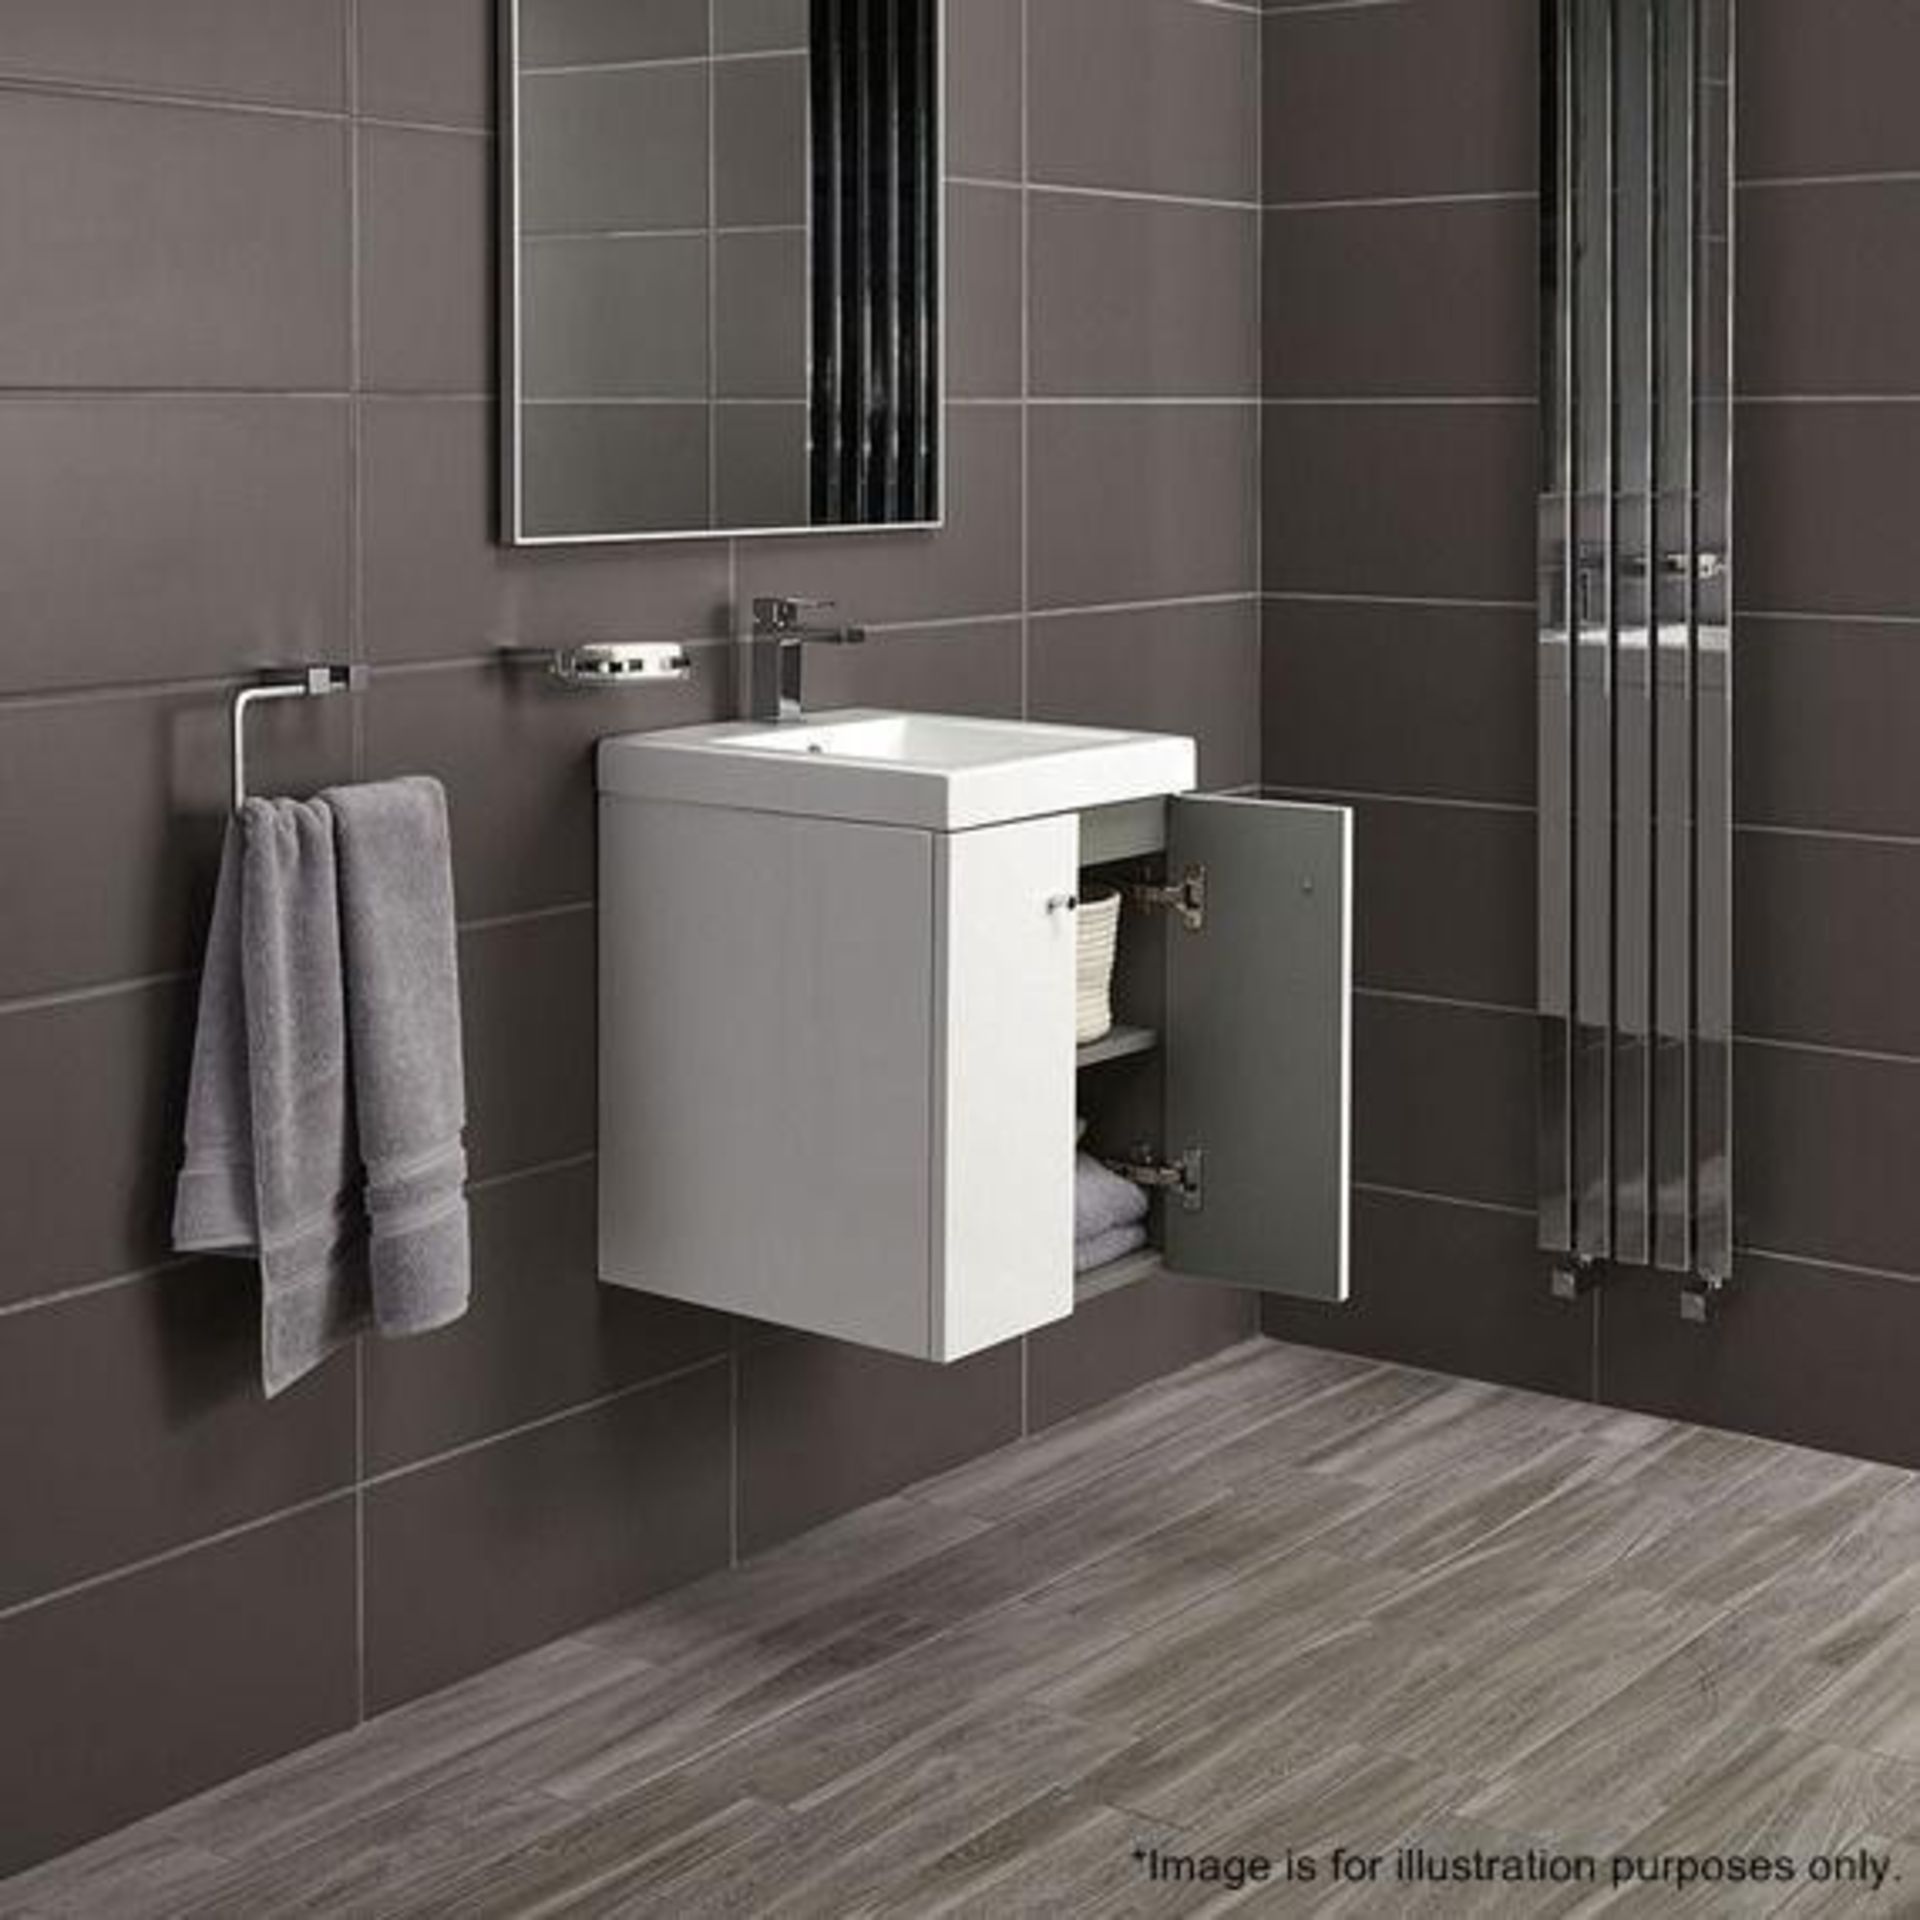 5 x Alpine Duo 400 Wall Hung Vanity Units In Gloss White - Brand New Boxed Stock - Dimensions: H49 x